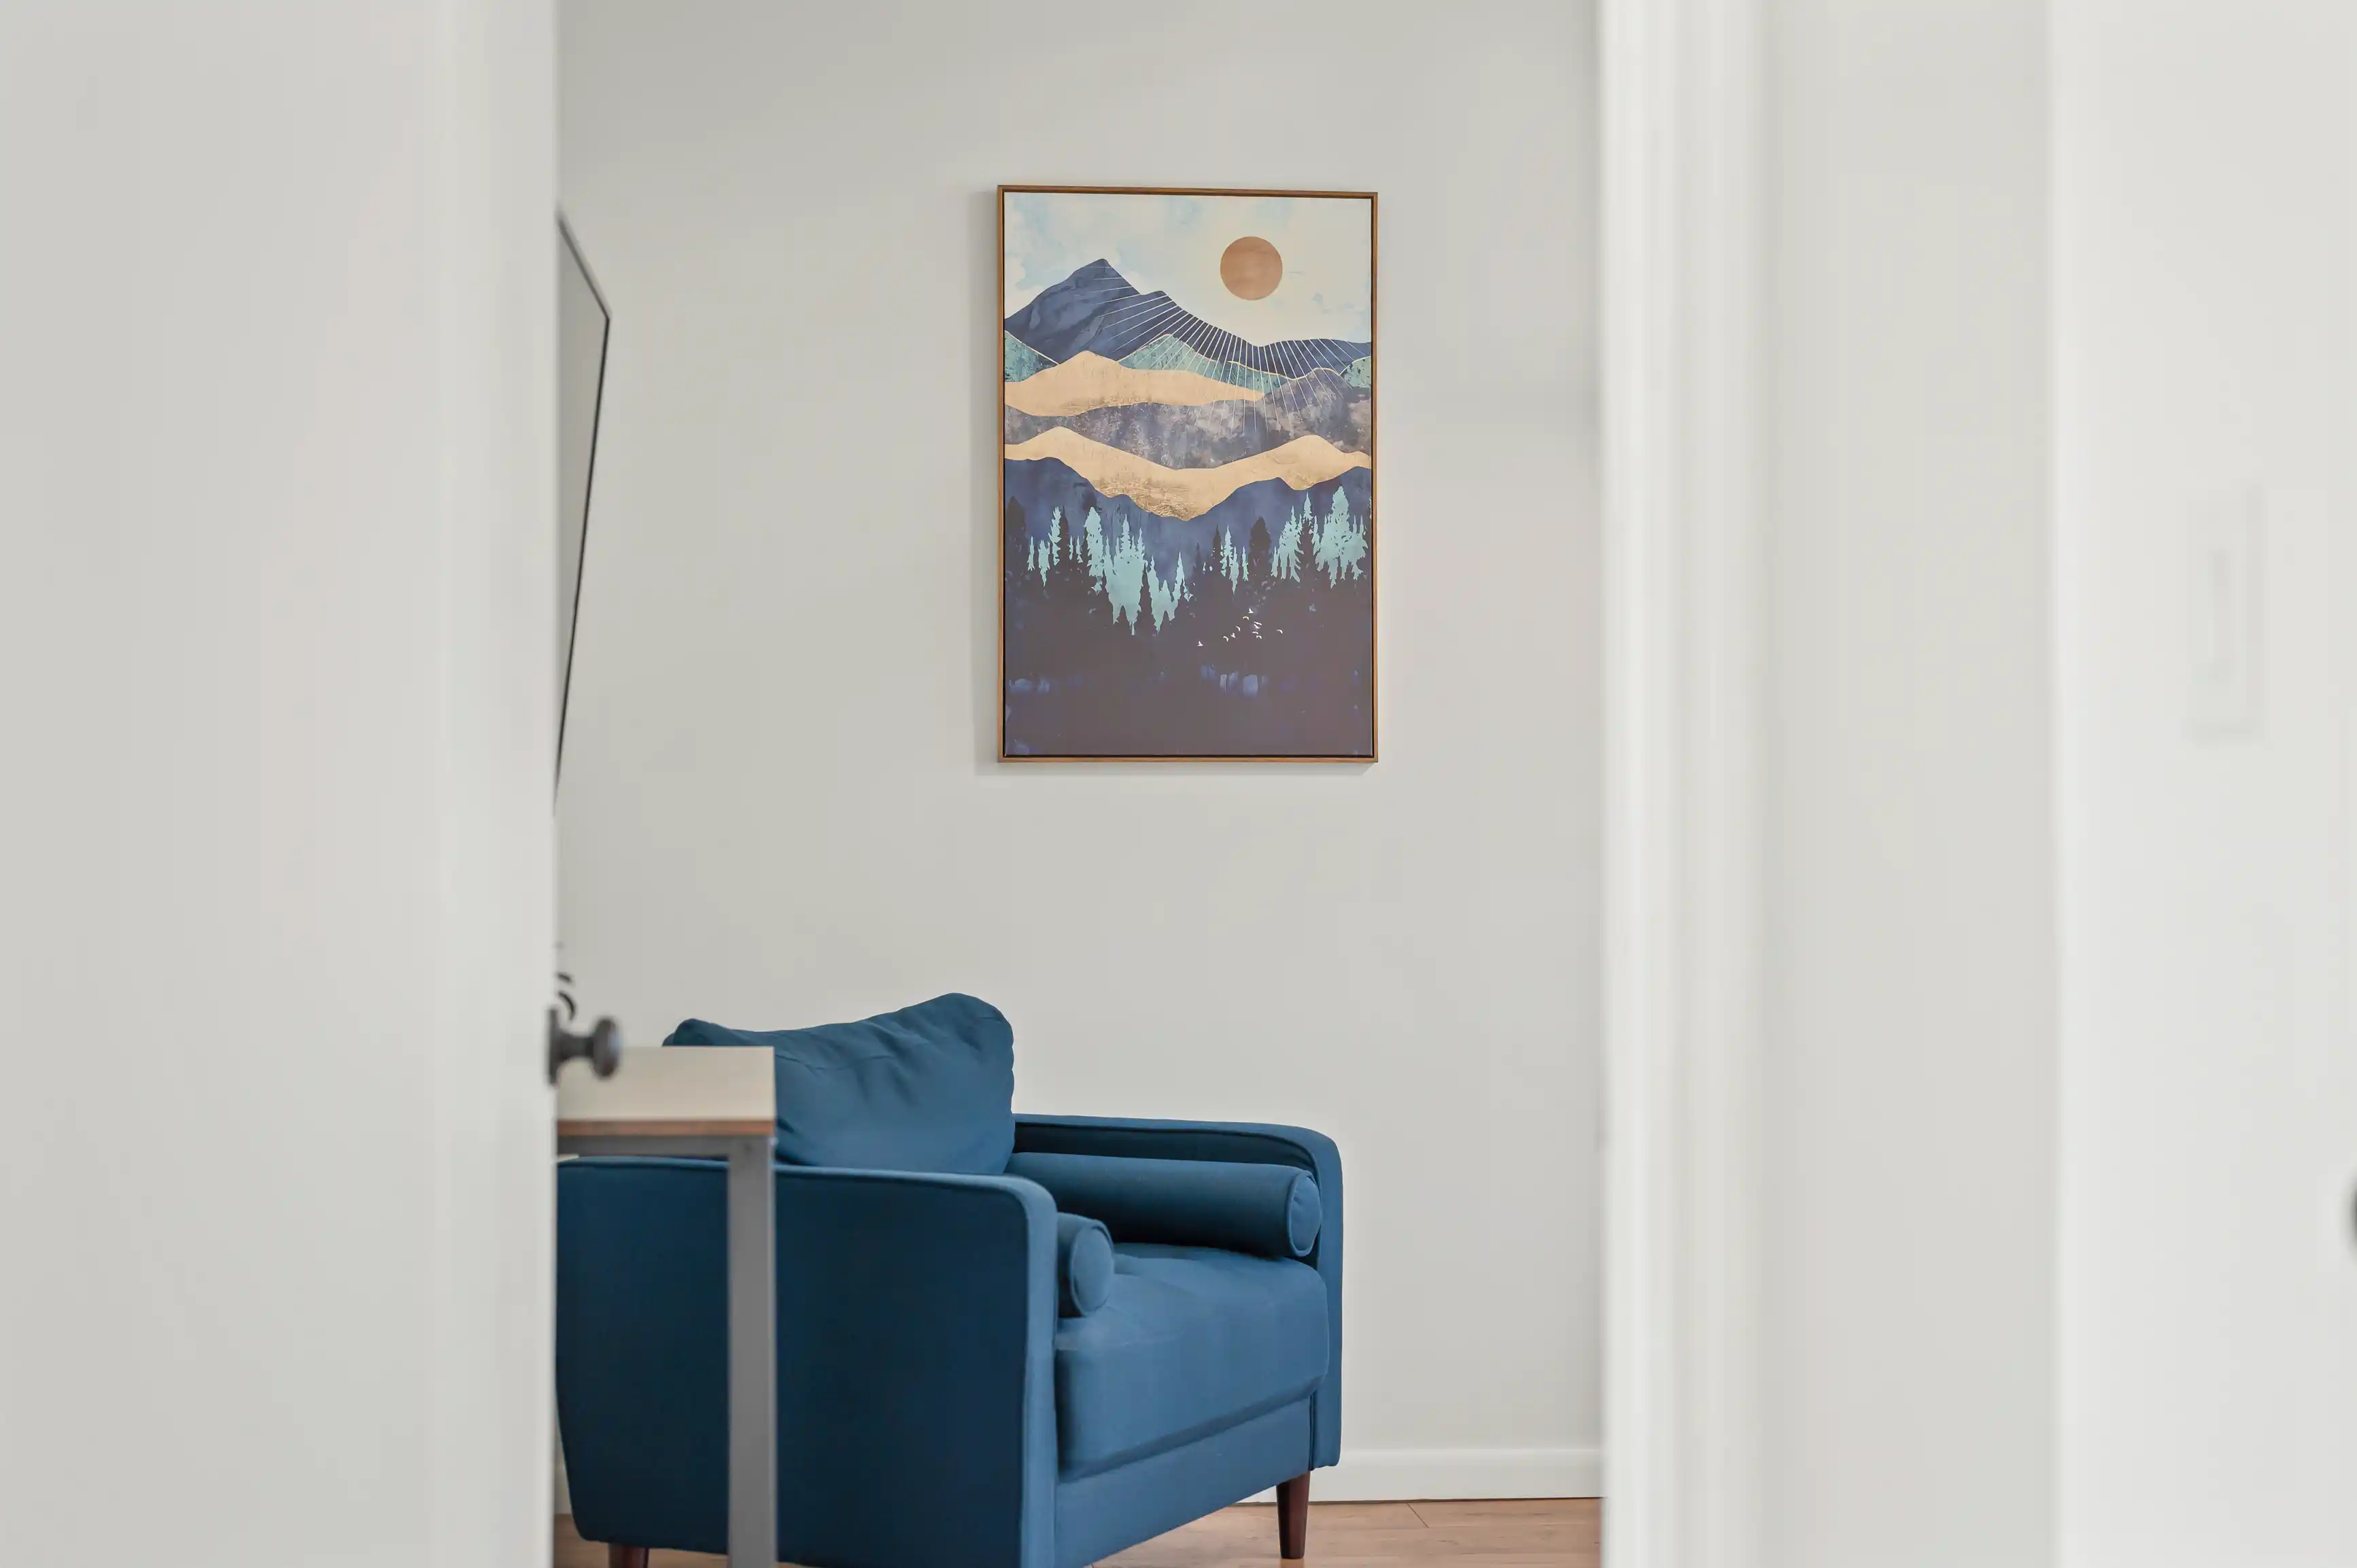 A minimalist living room corner with a blue armchair and framed mountainous landscape artwork on the wall.